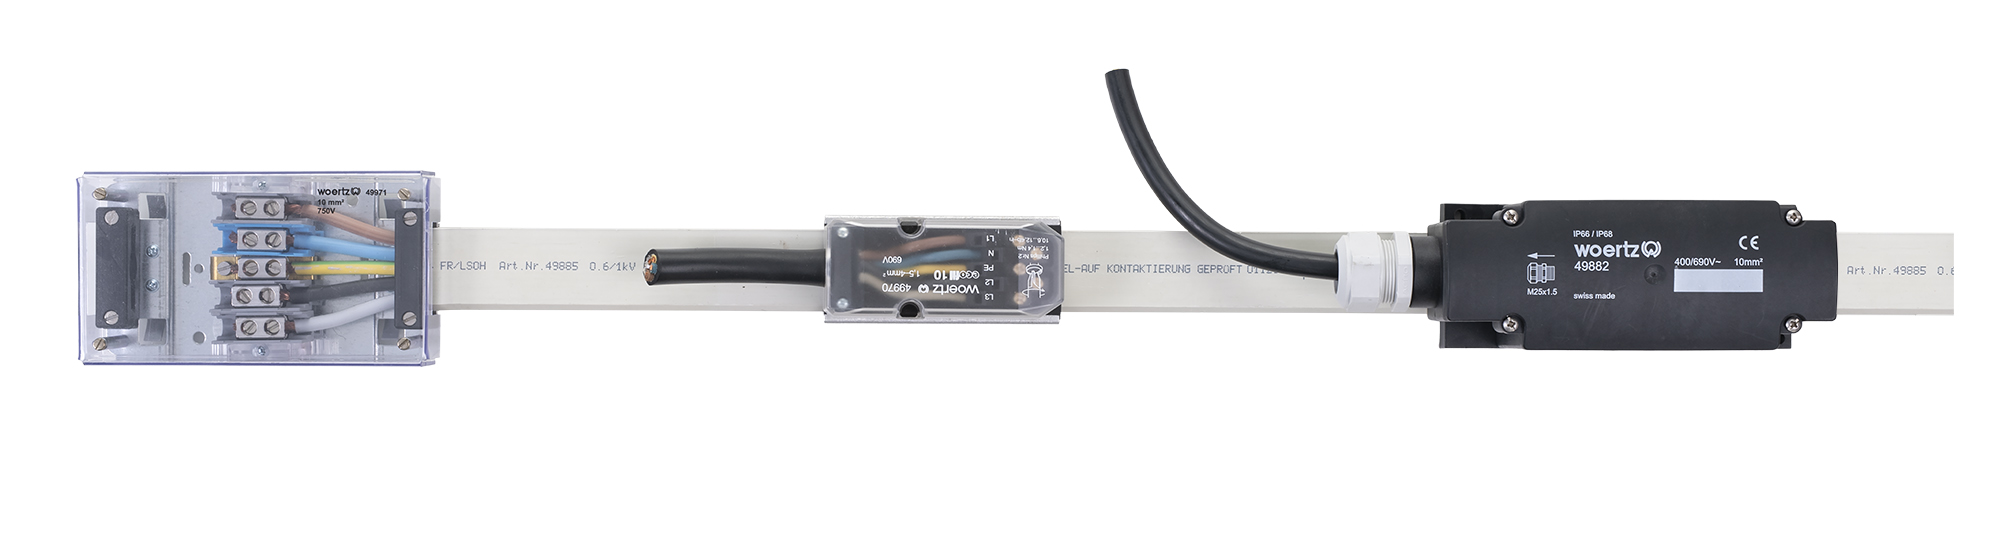 Flat cable system Power 5G10 mm²